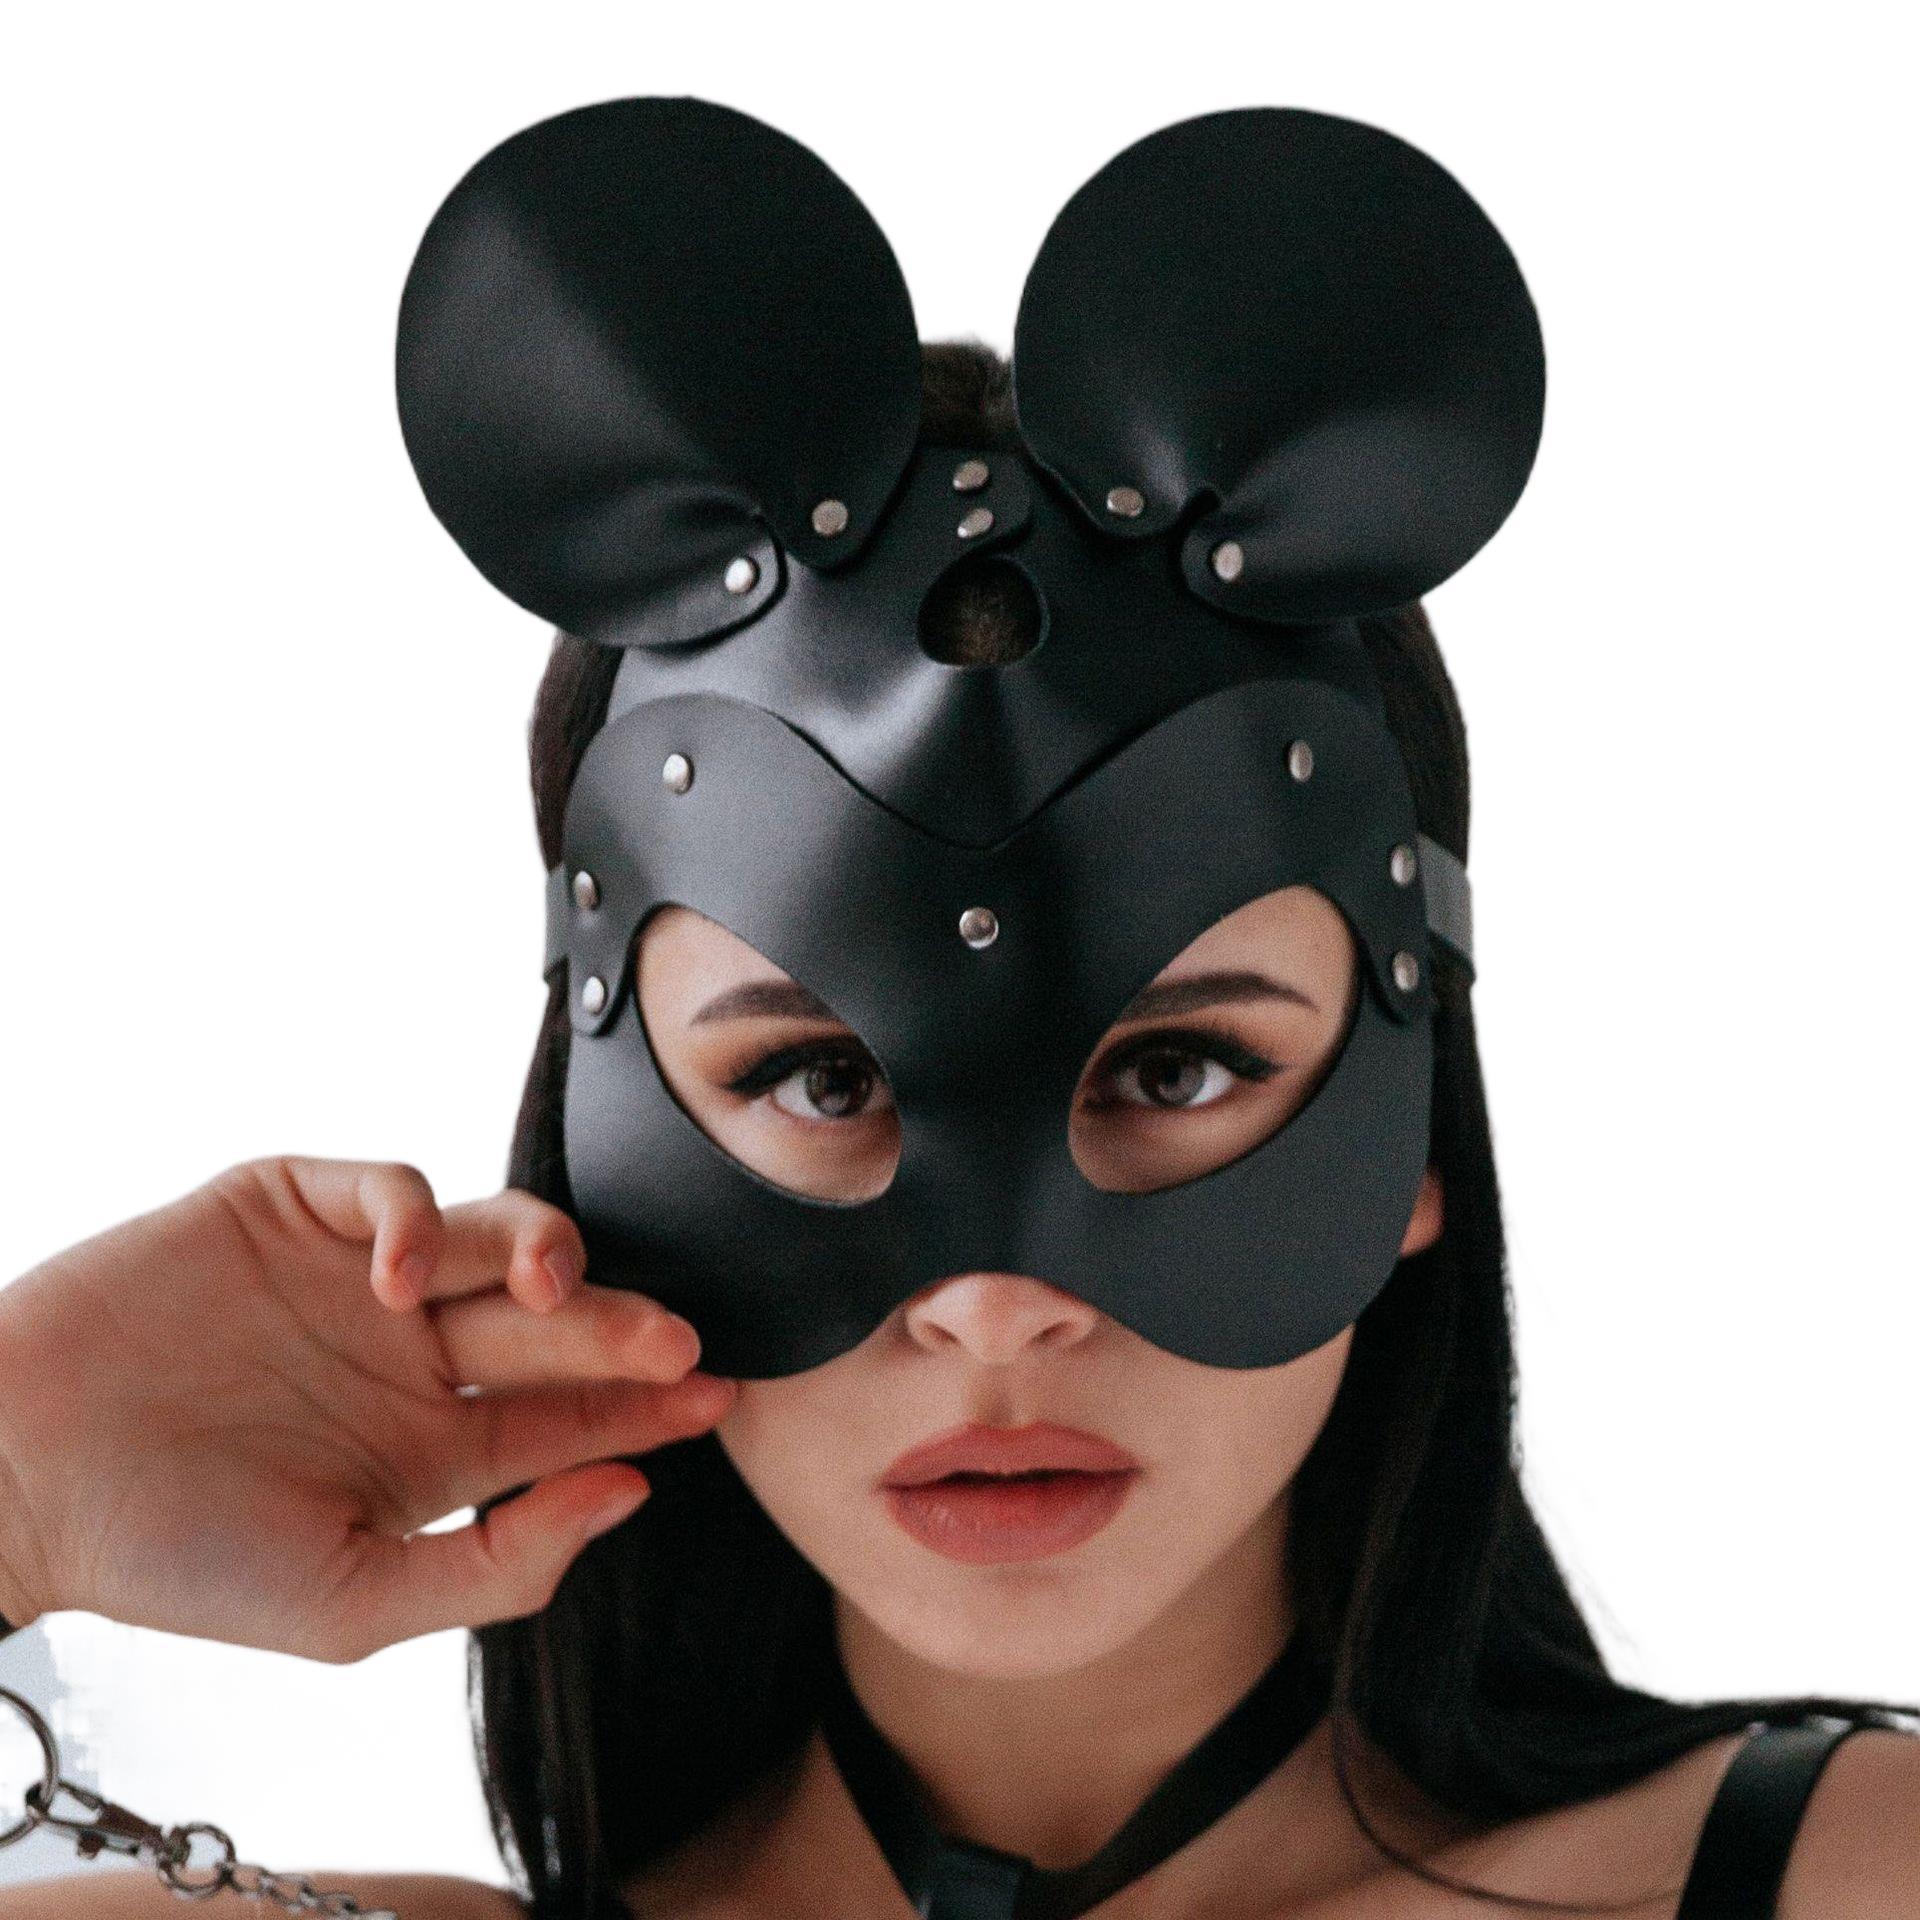 Adjustment SM Faux Leather Blindfold with Ear - lovemesexBlindfolds, Masks and Gags